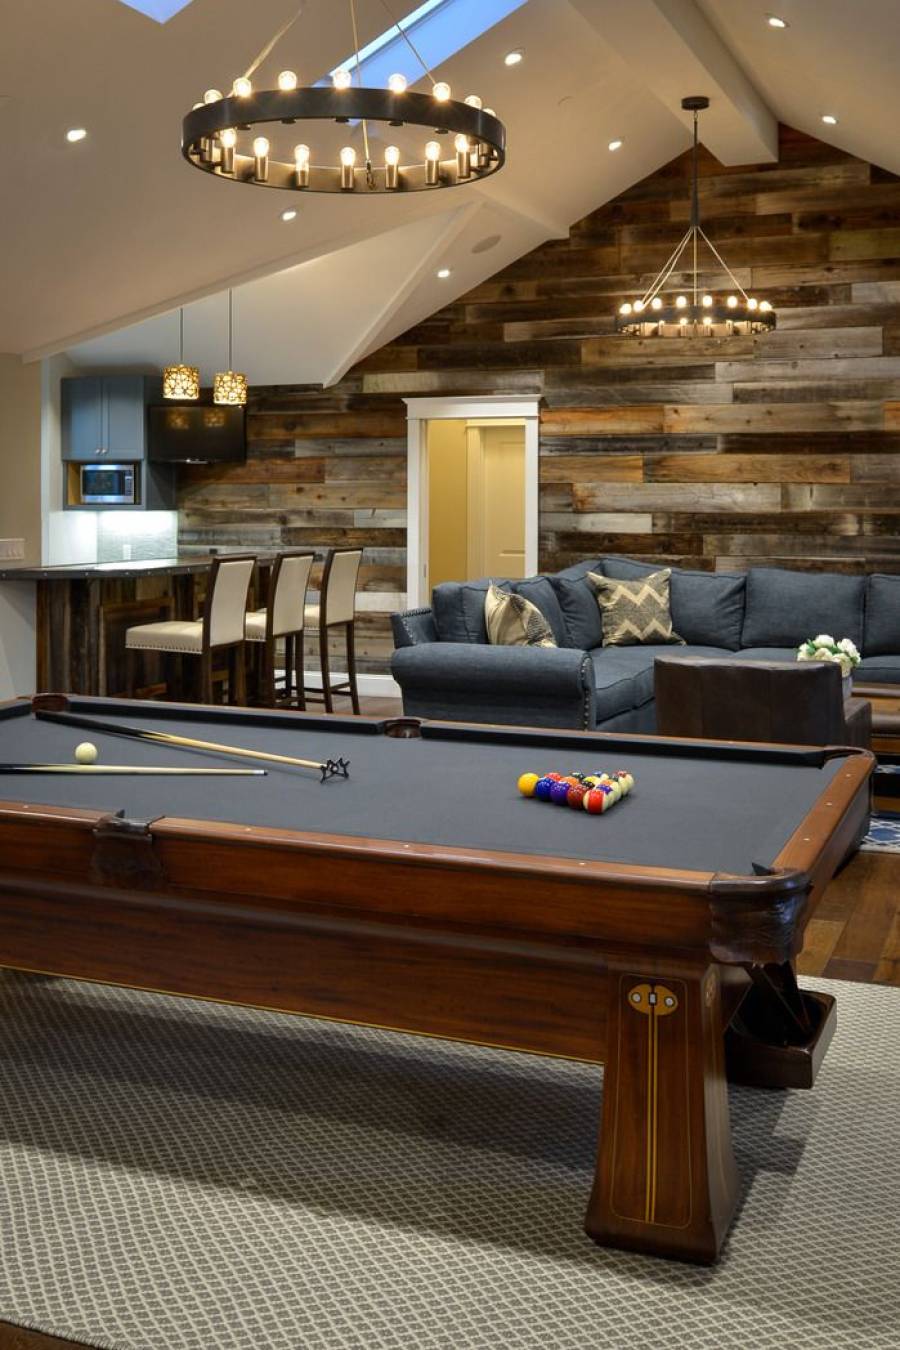 The Man Cave Ideas You Were Looking for All in One Place